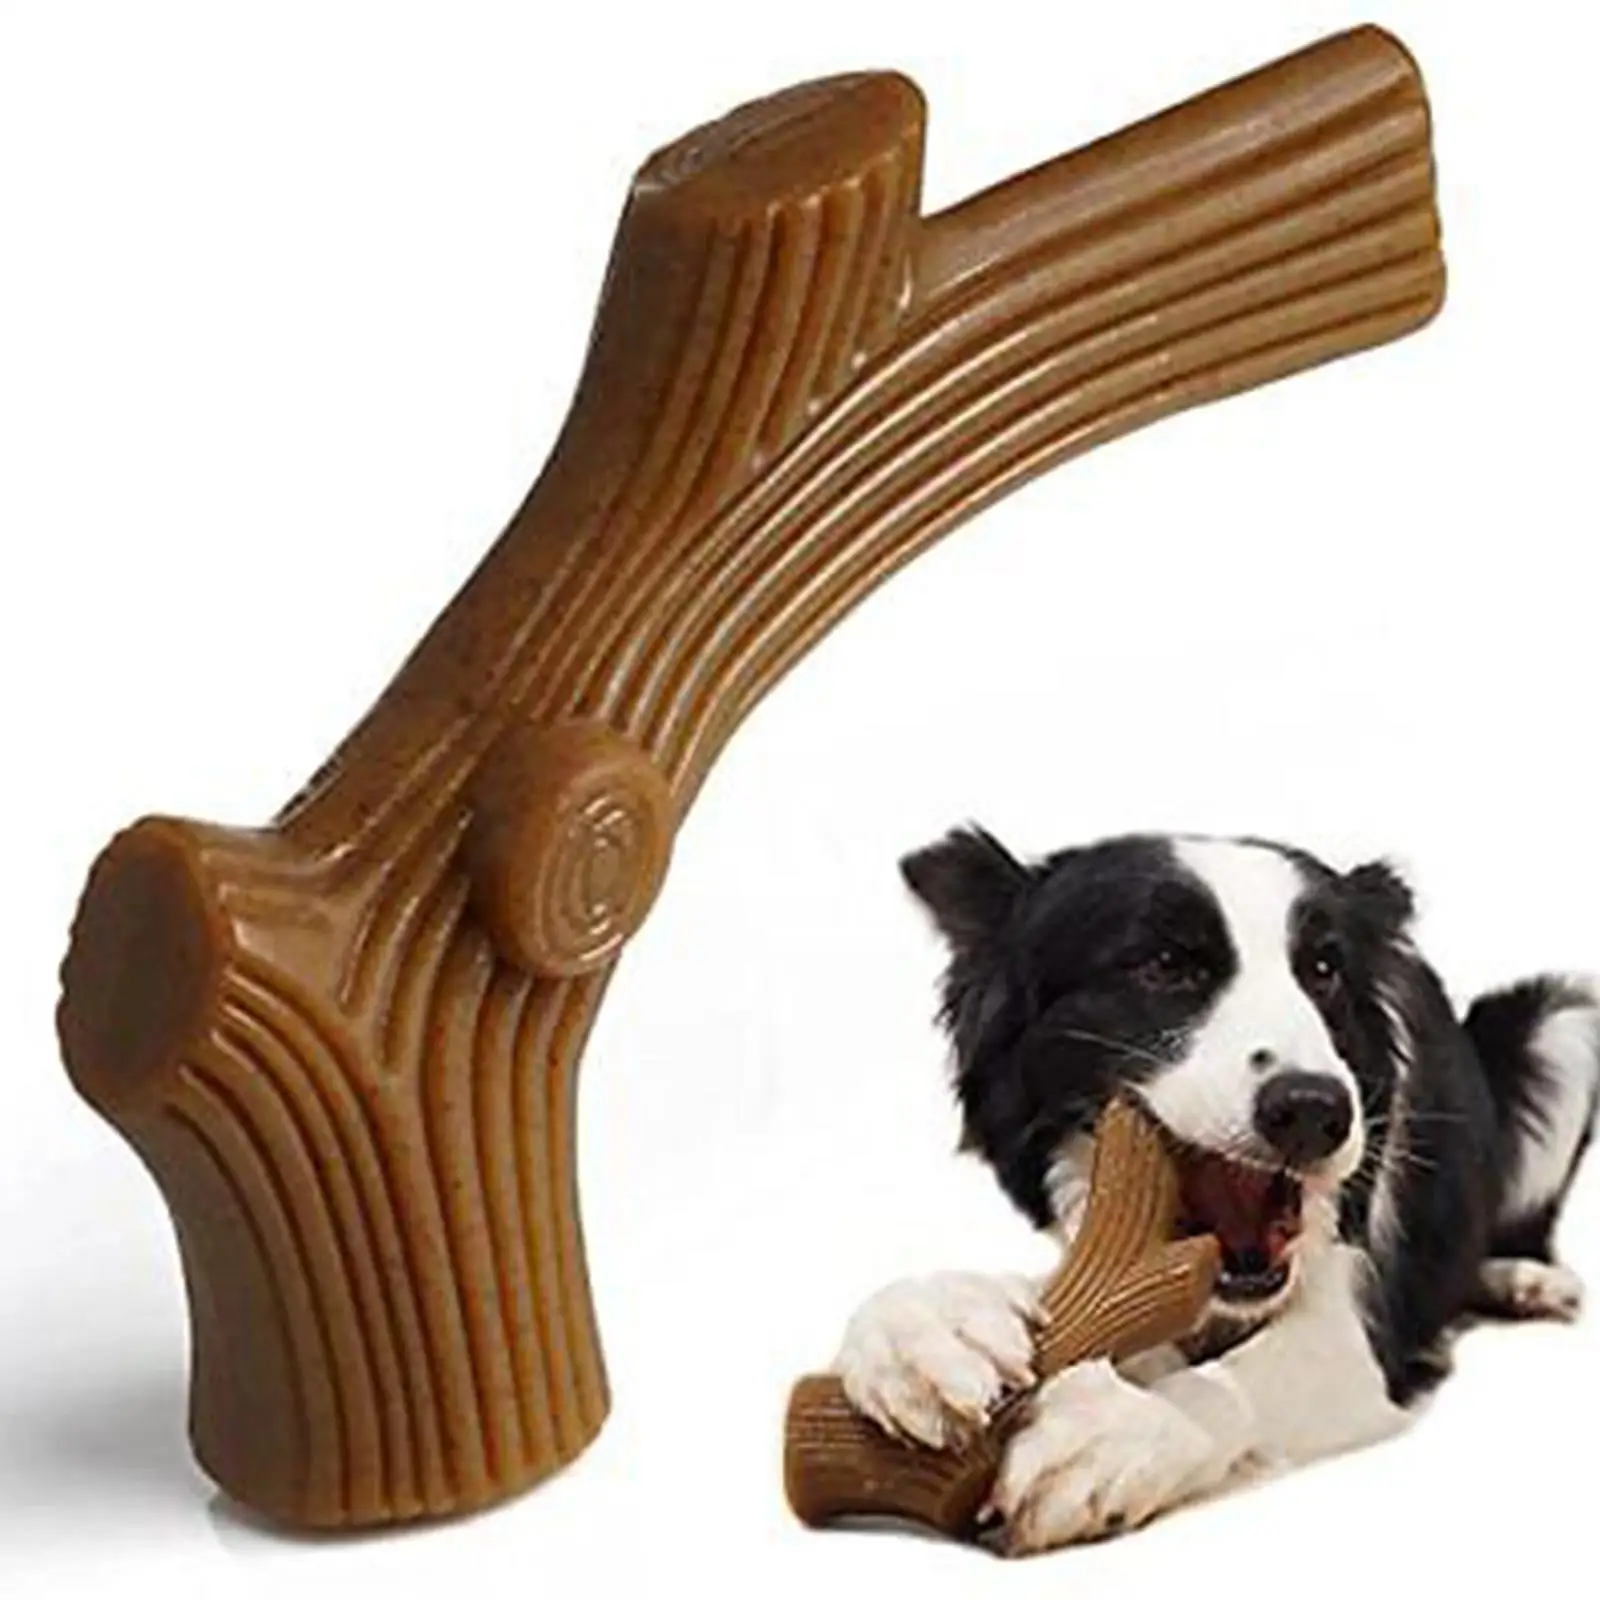 

Dog Chew Toy Almost Indestructible Dog Dental Chews Stick Antler Design Dog Bone Dogs Gift Tough Dog Toys for Aggressive Chewers